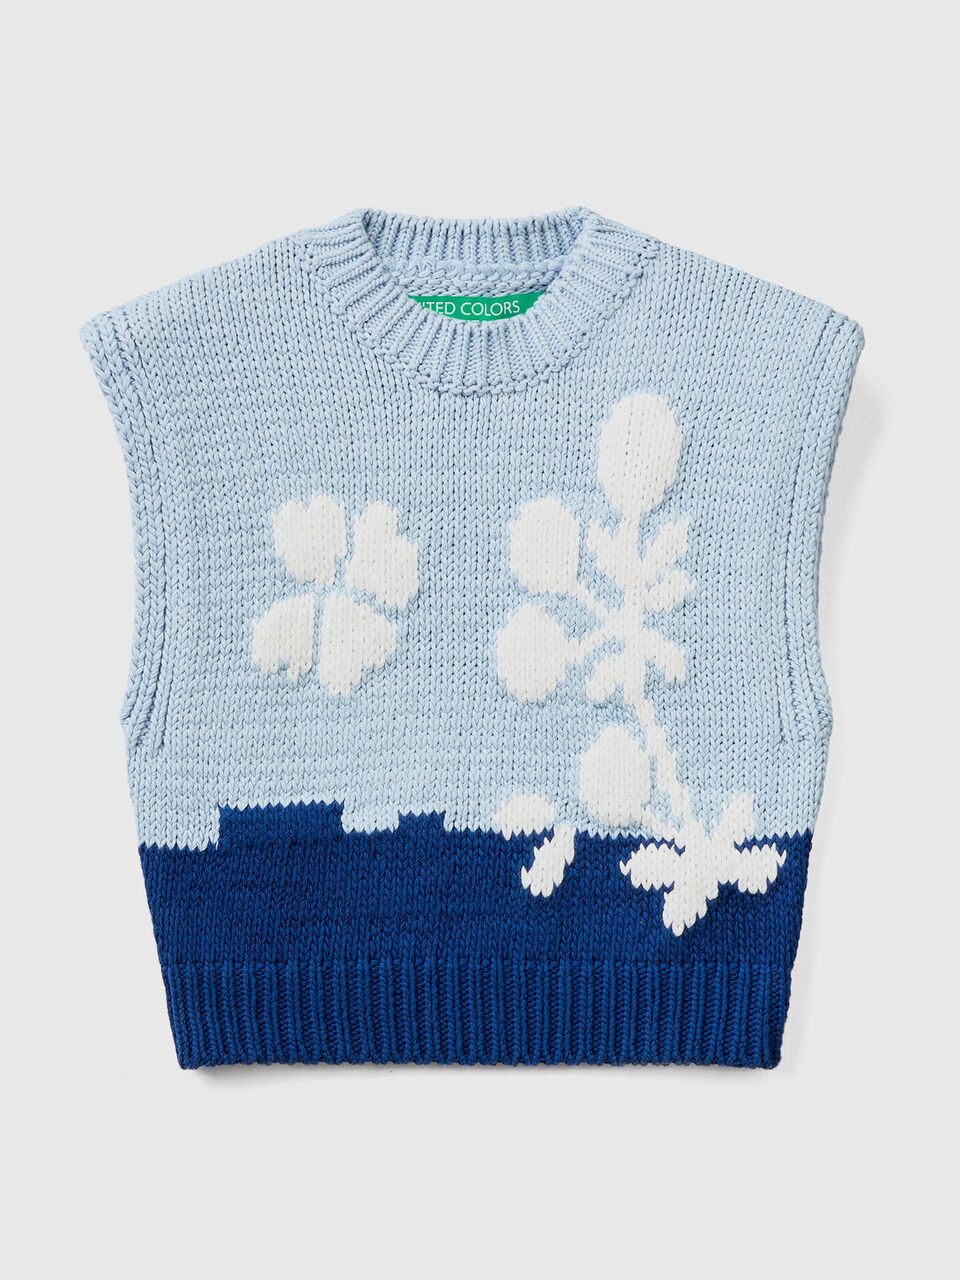 floral inlay Benetton | - Blue vest Blue with